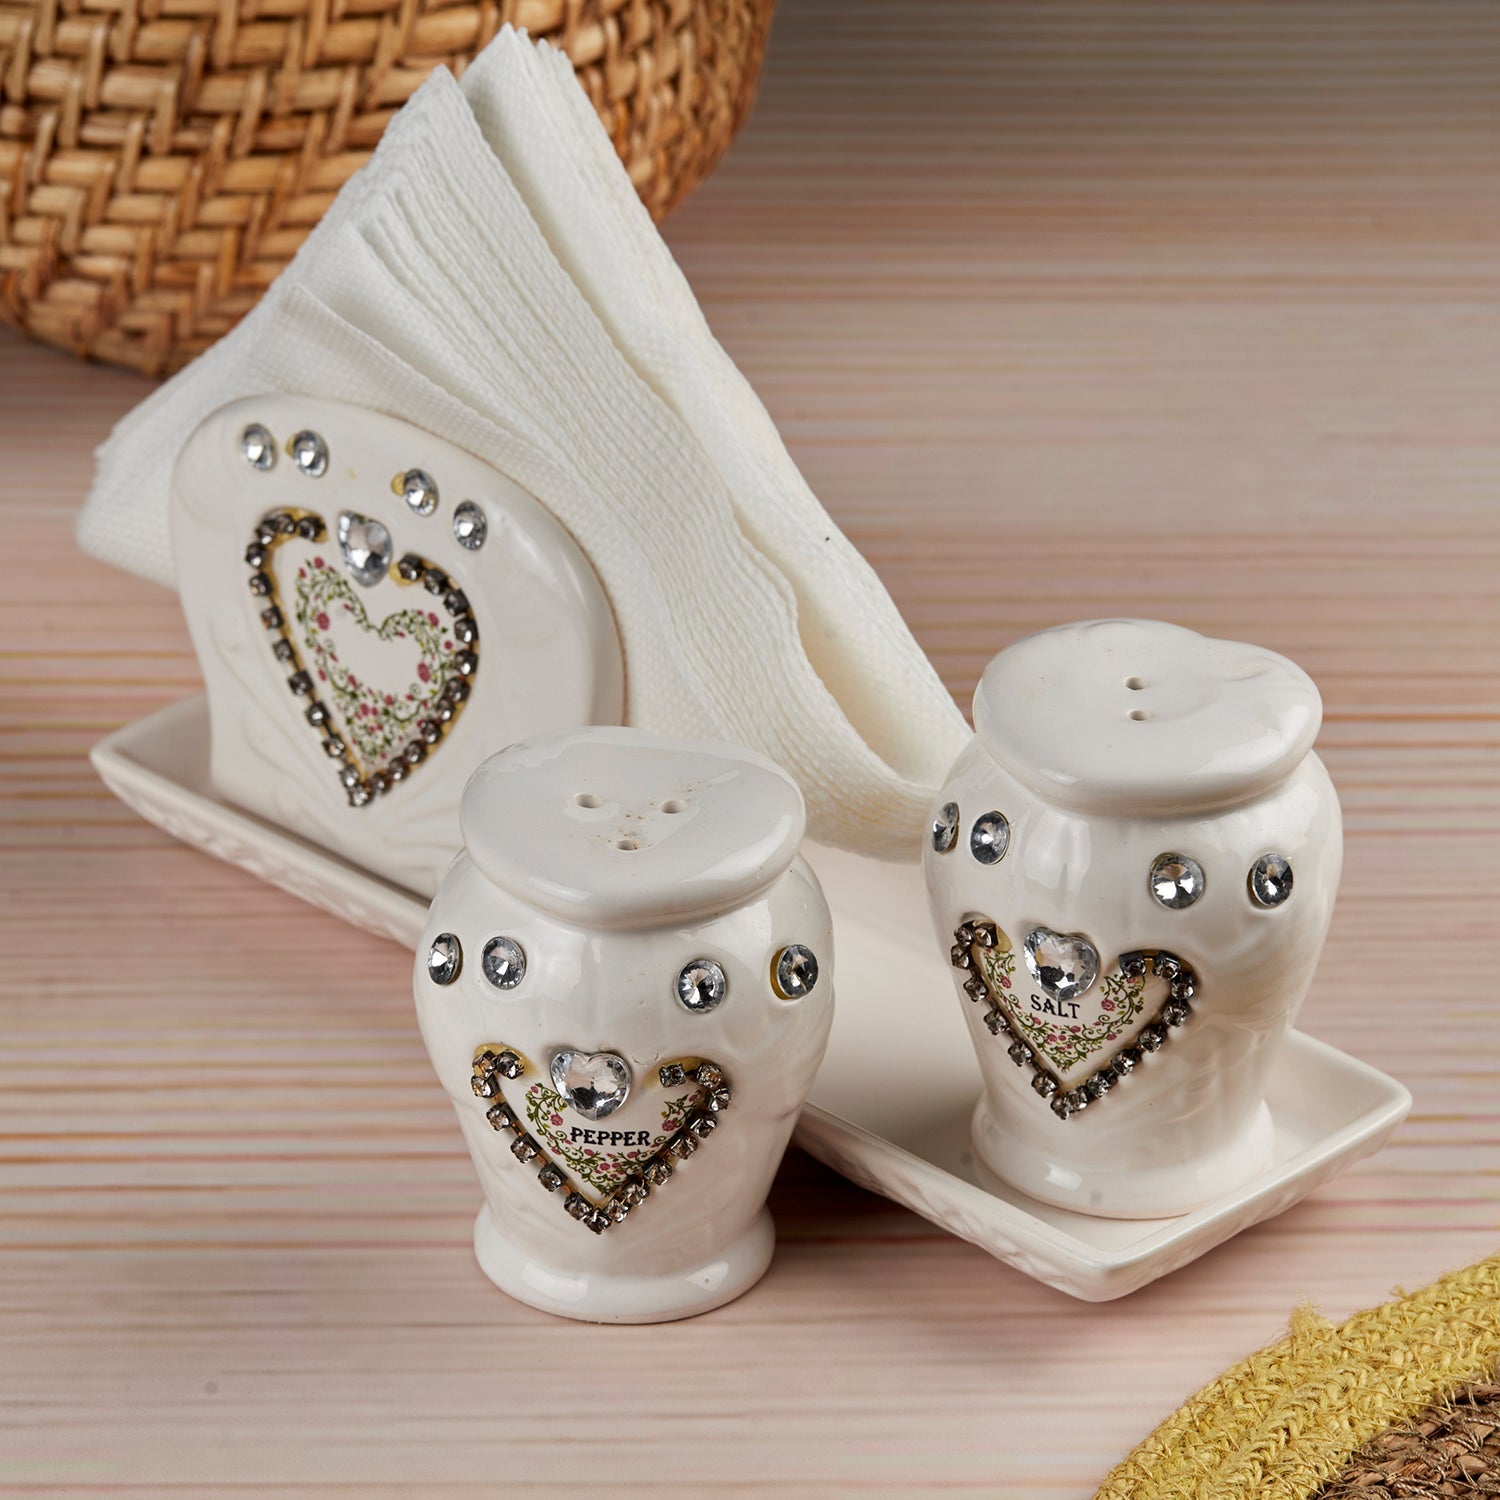 Ceramic Salt and Pepper Shakers Set with tray for Dining Table (10716)